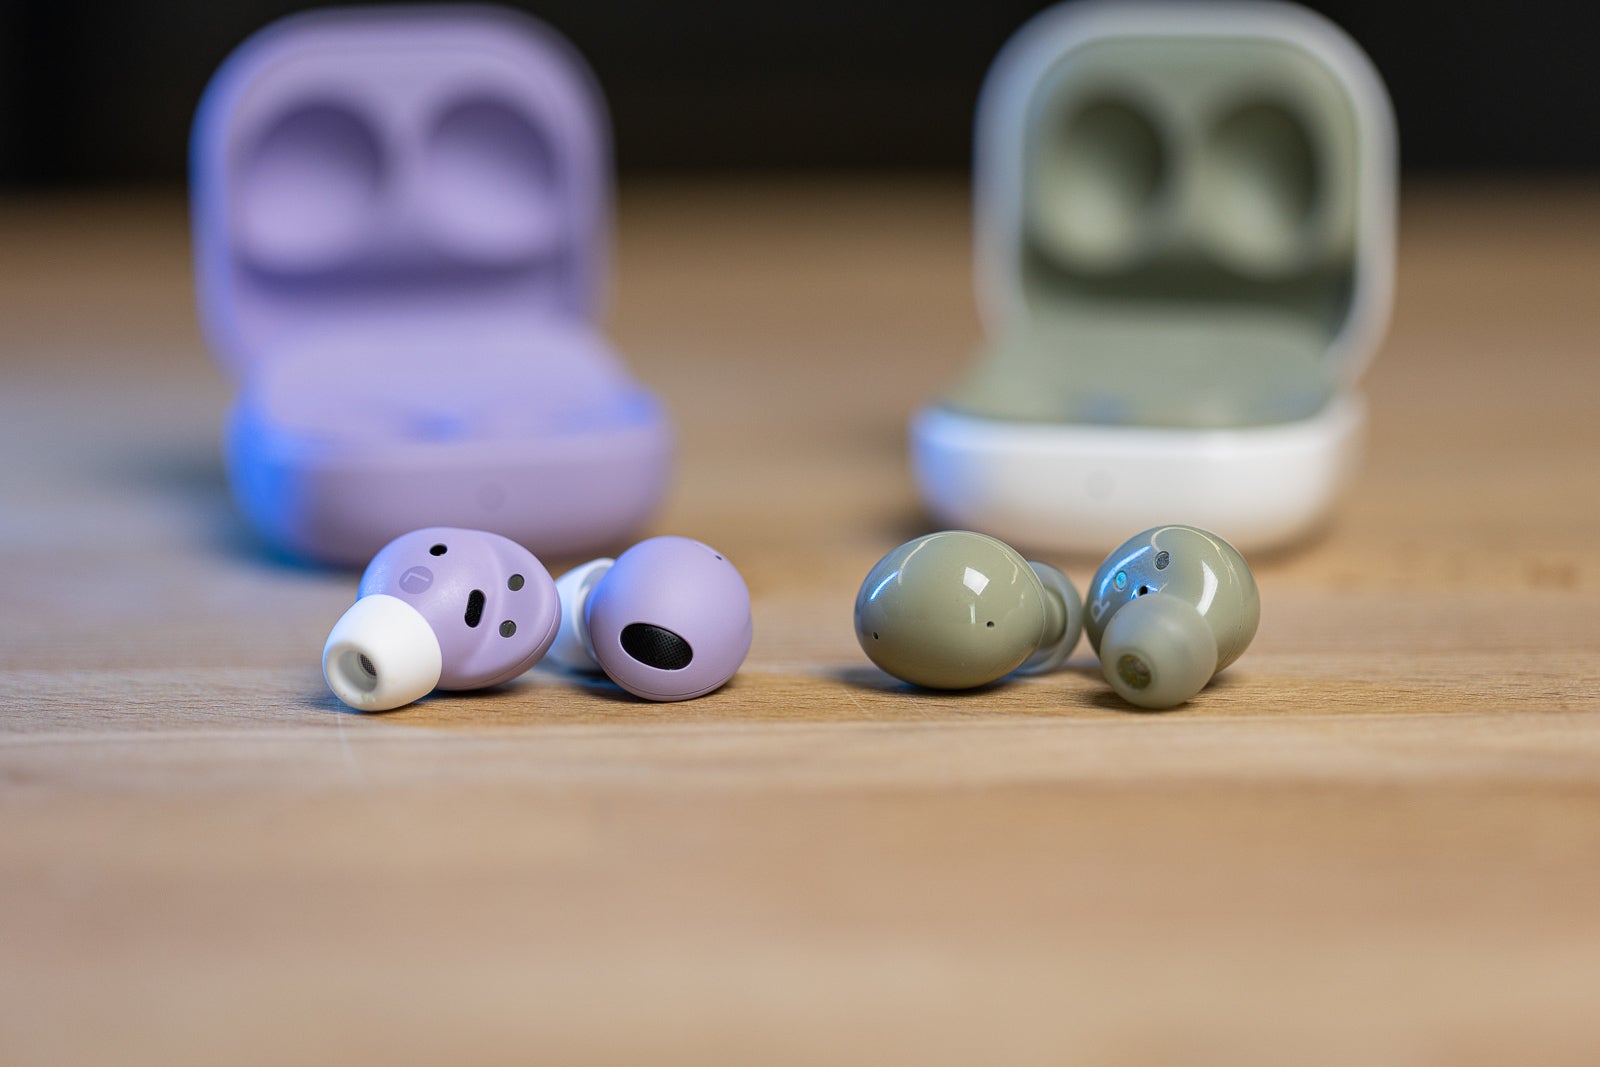 (Image credit - PhoneArena) Galaxy Buds 2 Pro (left) and Galaxy Buds 2 (right) - Galaxy Buds 2 Pro vs Galaxy Buds 2: Can you hear a difference? Or even see it?